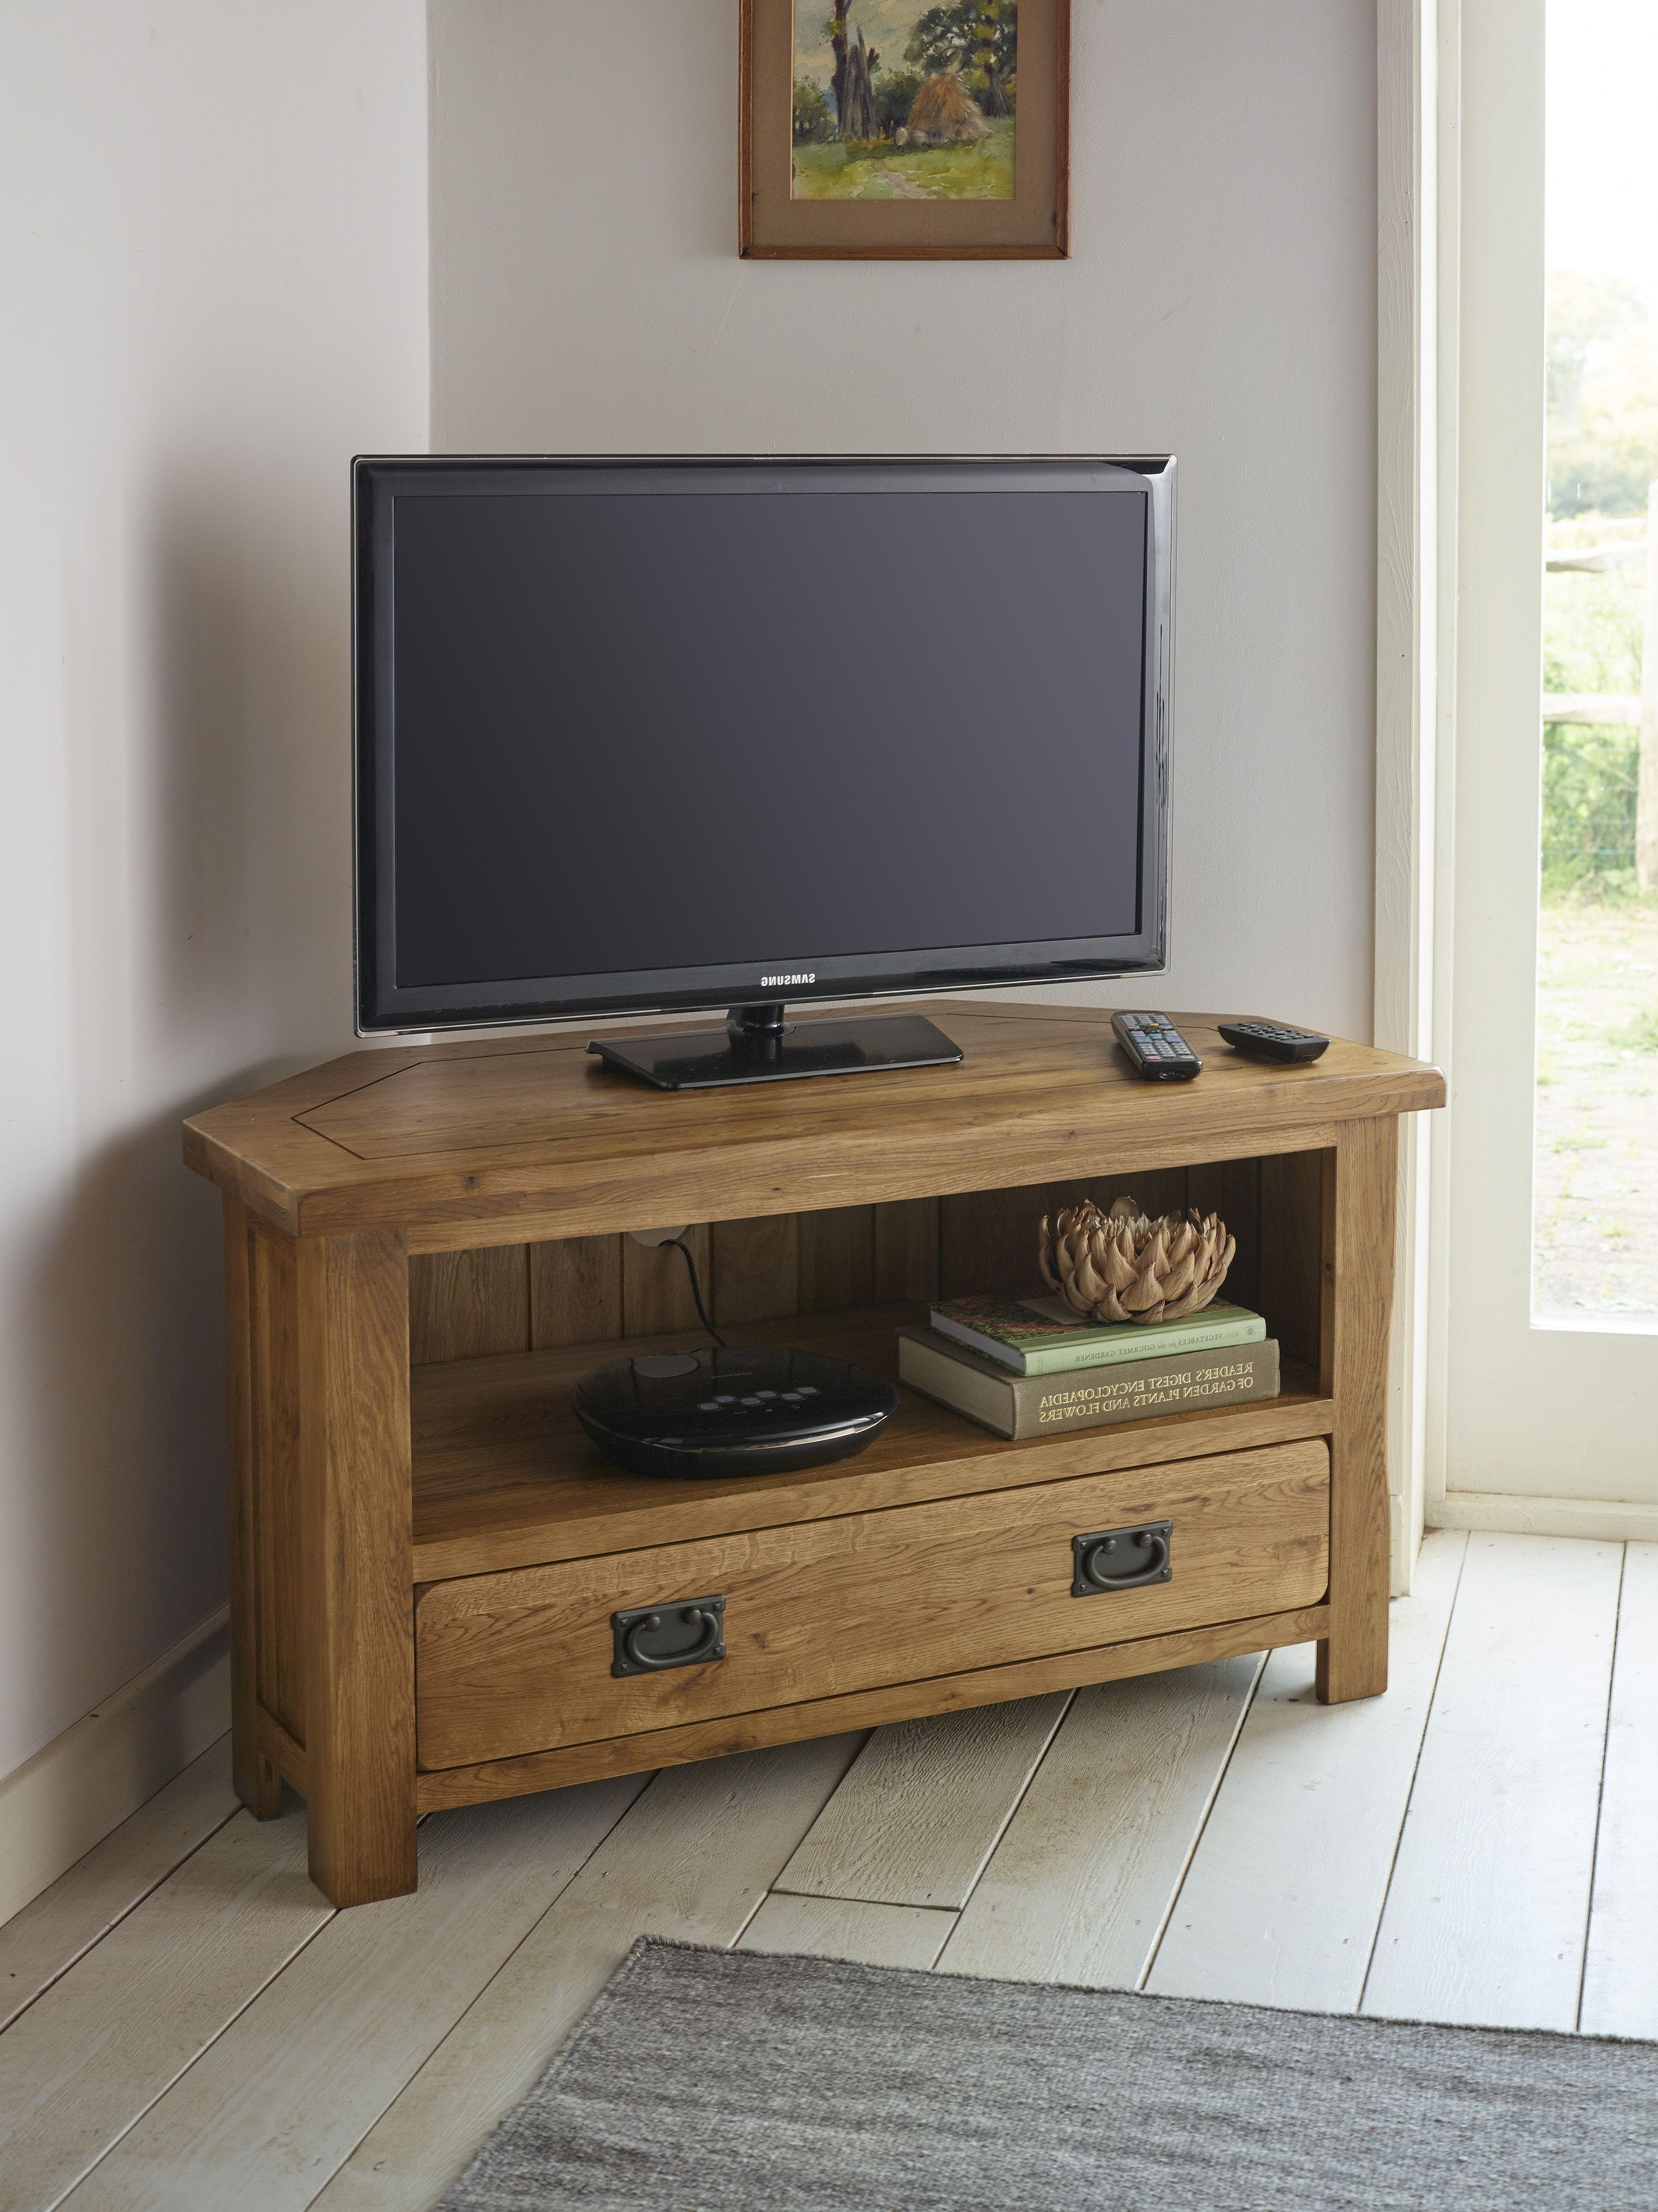 Popular Handcrafted From A Grade Solid Oak, The Original Rustic Solid Oak With Regard To Rustic Corner Tv Stands (View 19 of 20)